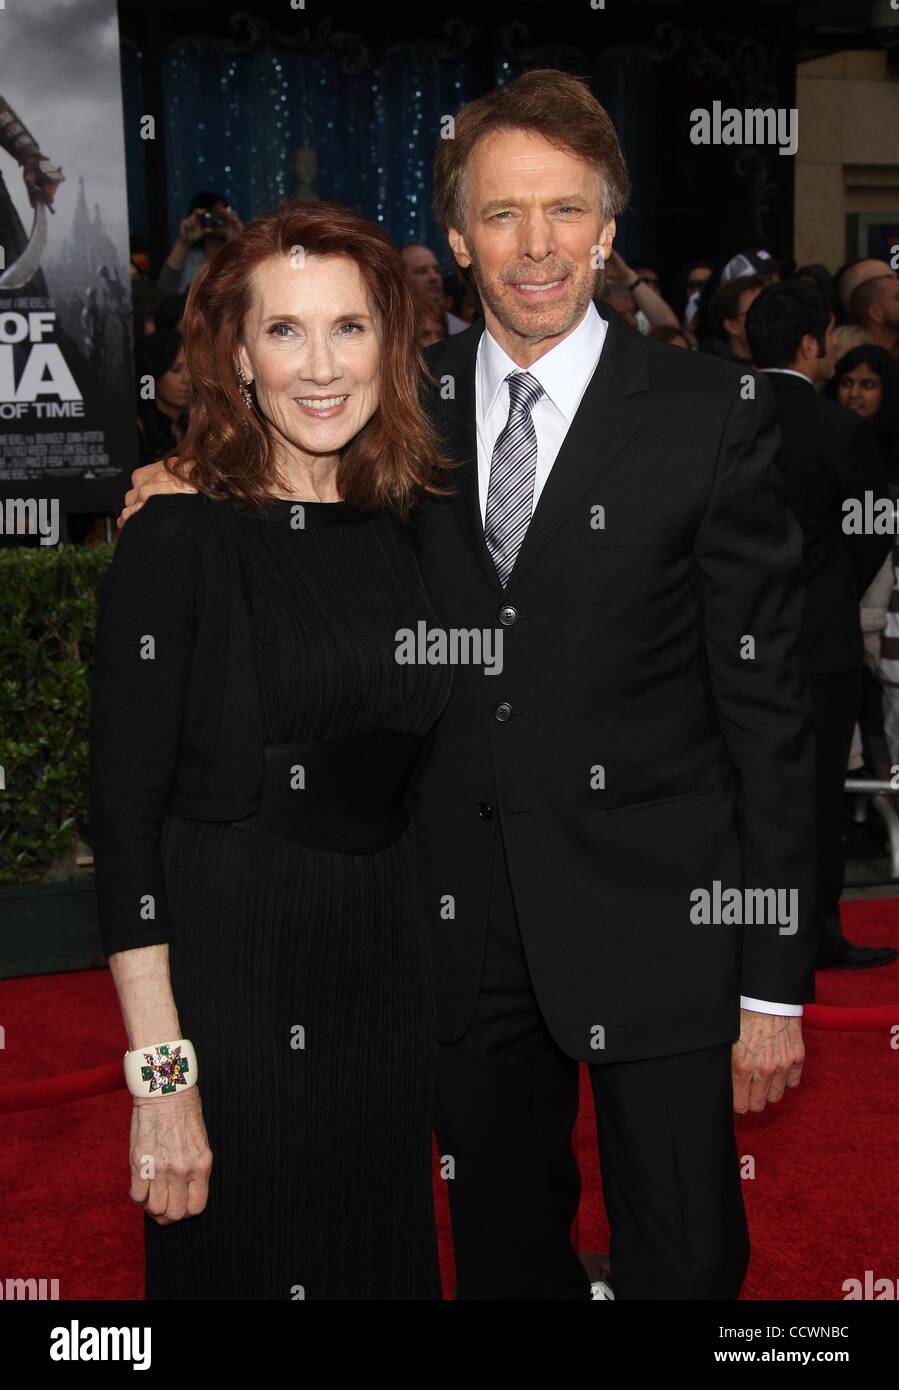 May 17, 2010 - Hollywood, California, USA - Producer JERRY BRUCKHEIMER & WIFE LINDA arriving to the 'Prince of Persia The Sands of Time' Hollywood Premiere held at Mann's Chinese Theatre. (Credit Image: © Lisa O'Connor/ZUMA Press) Stock Photo